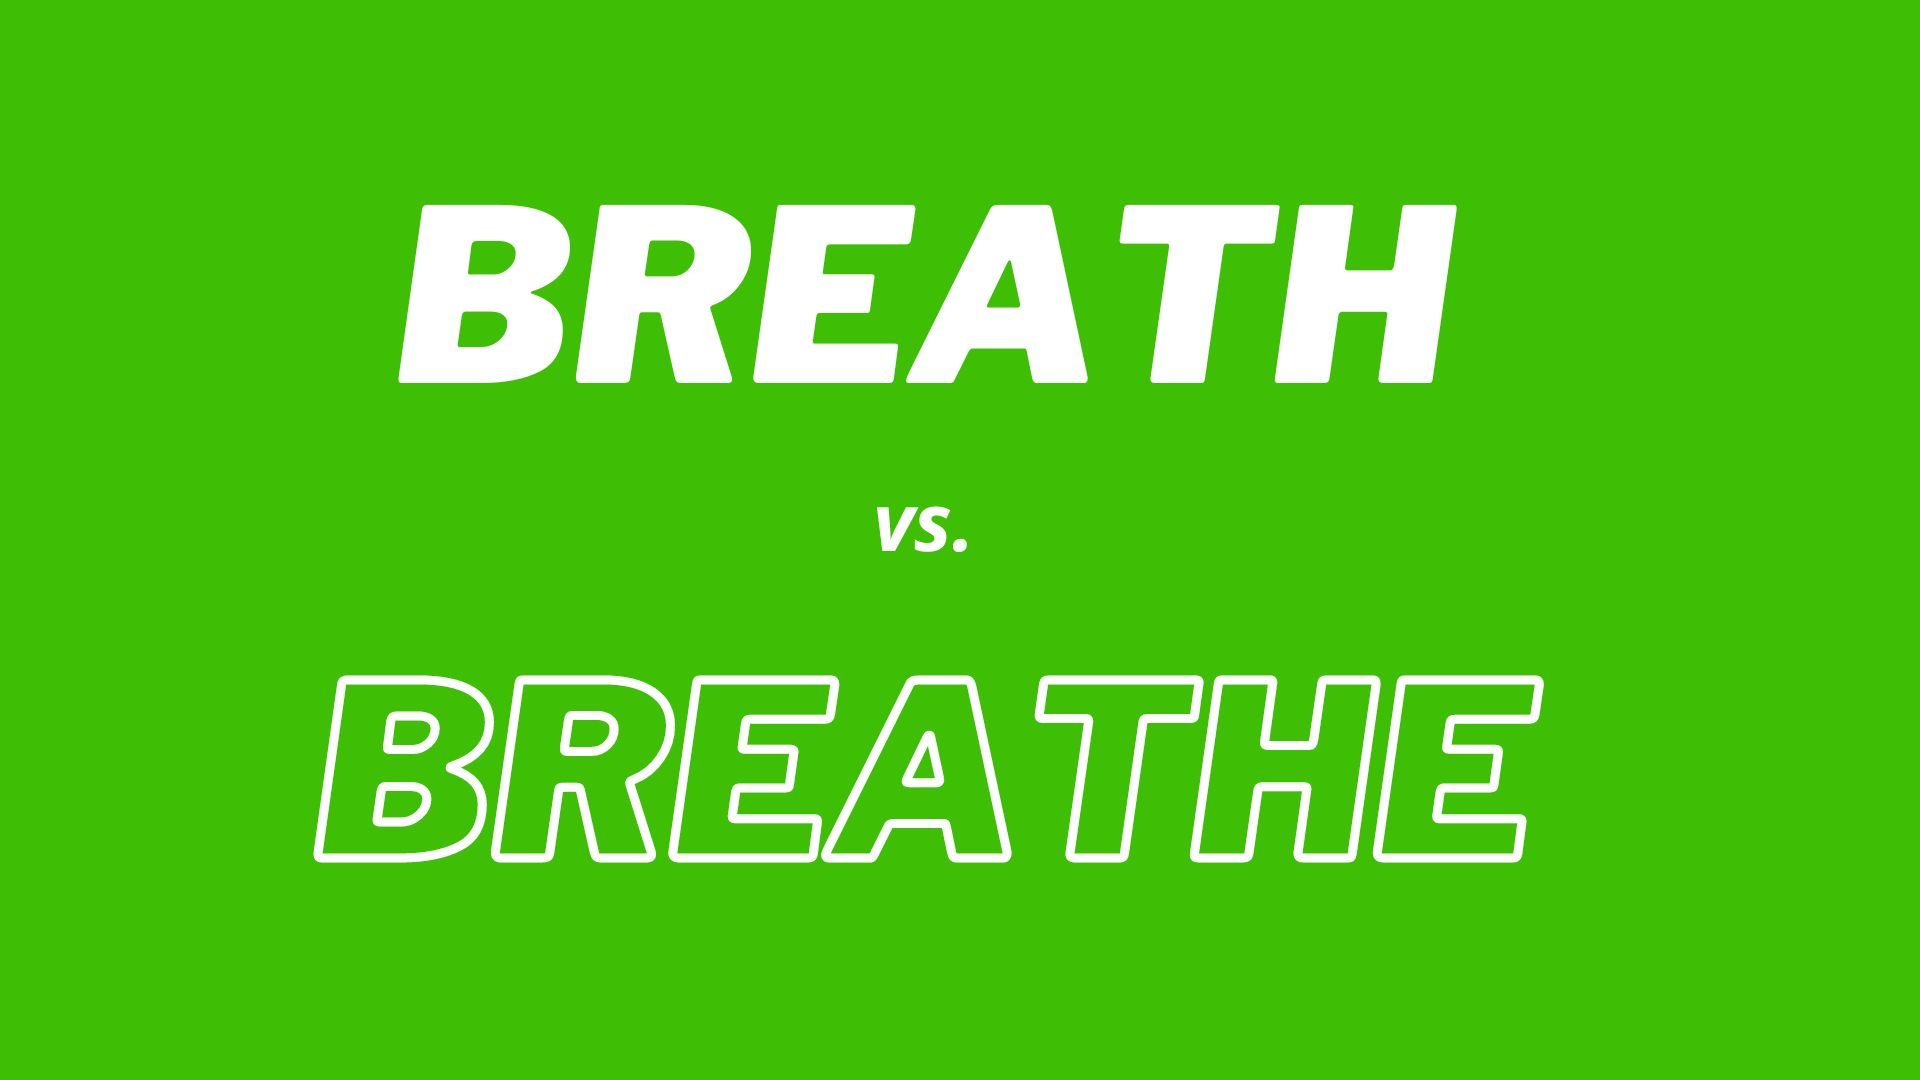 Visual comparison and definitions of words Breath and Breathe